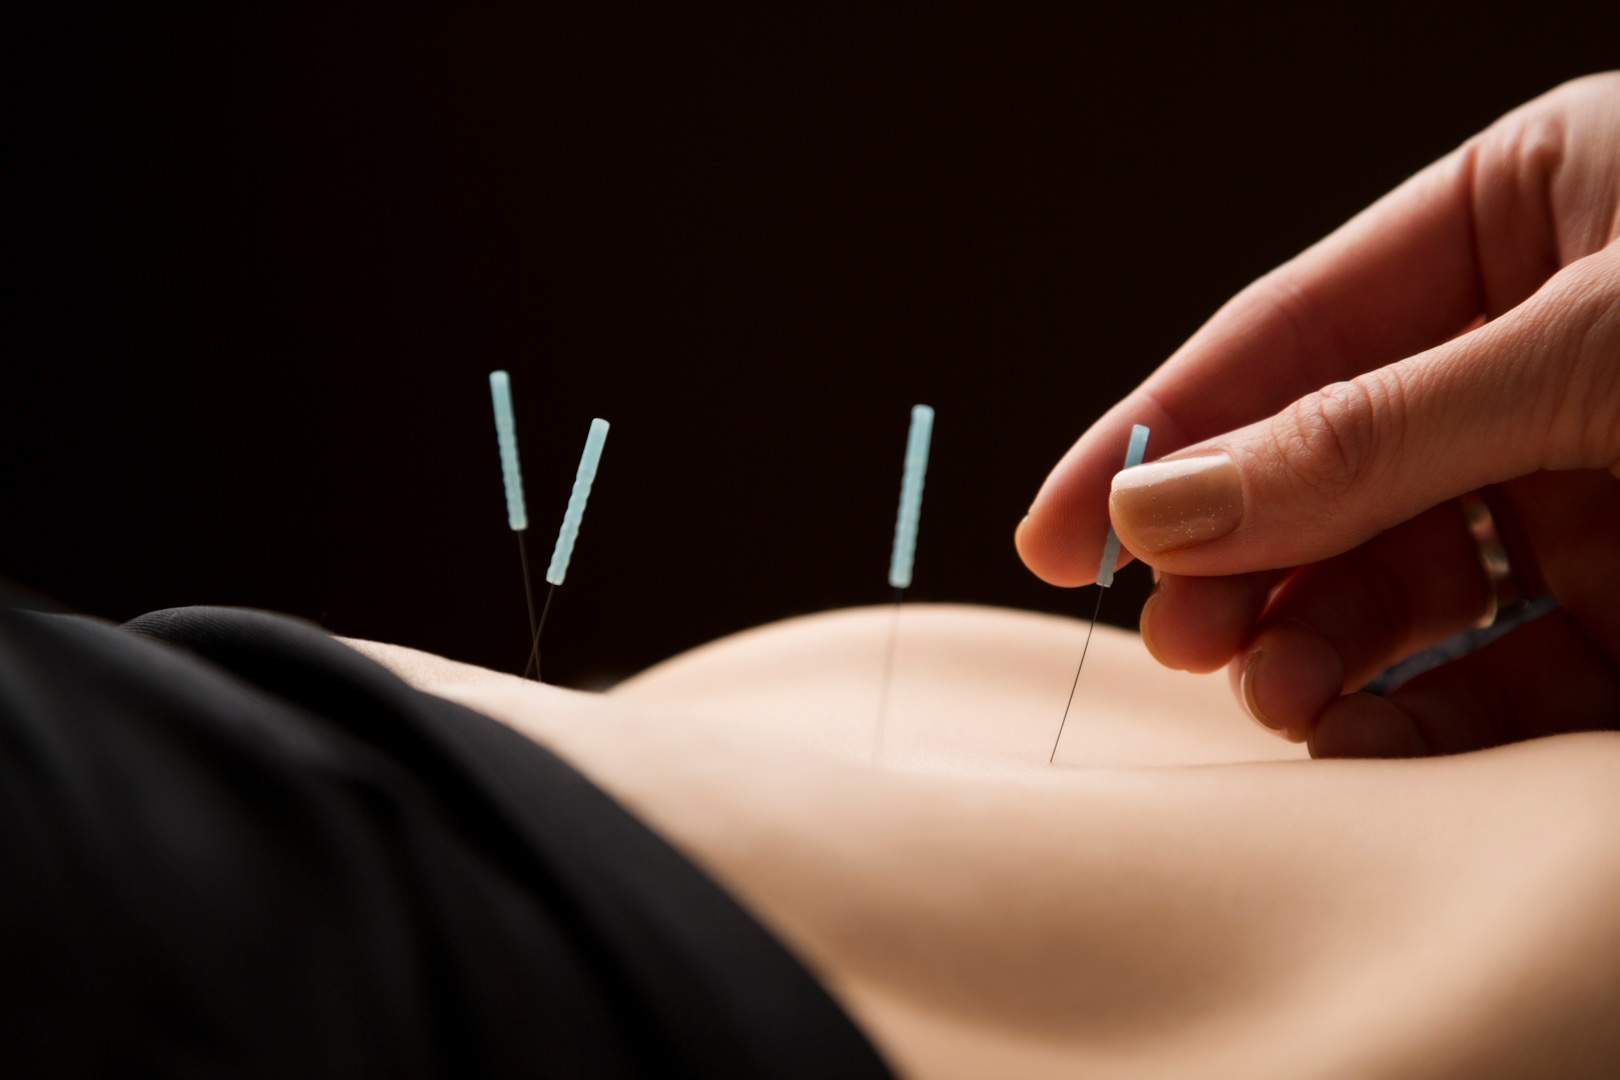 Acupuncture being performed on lower back.